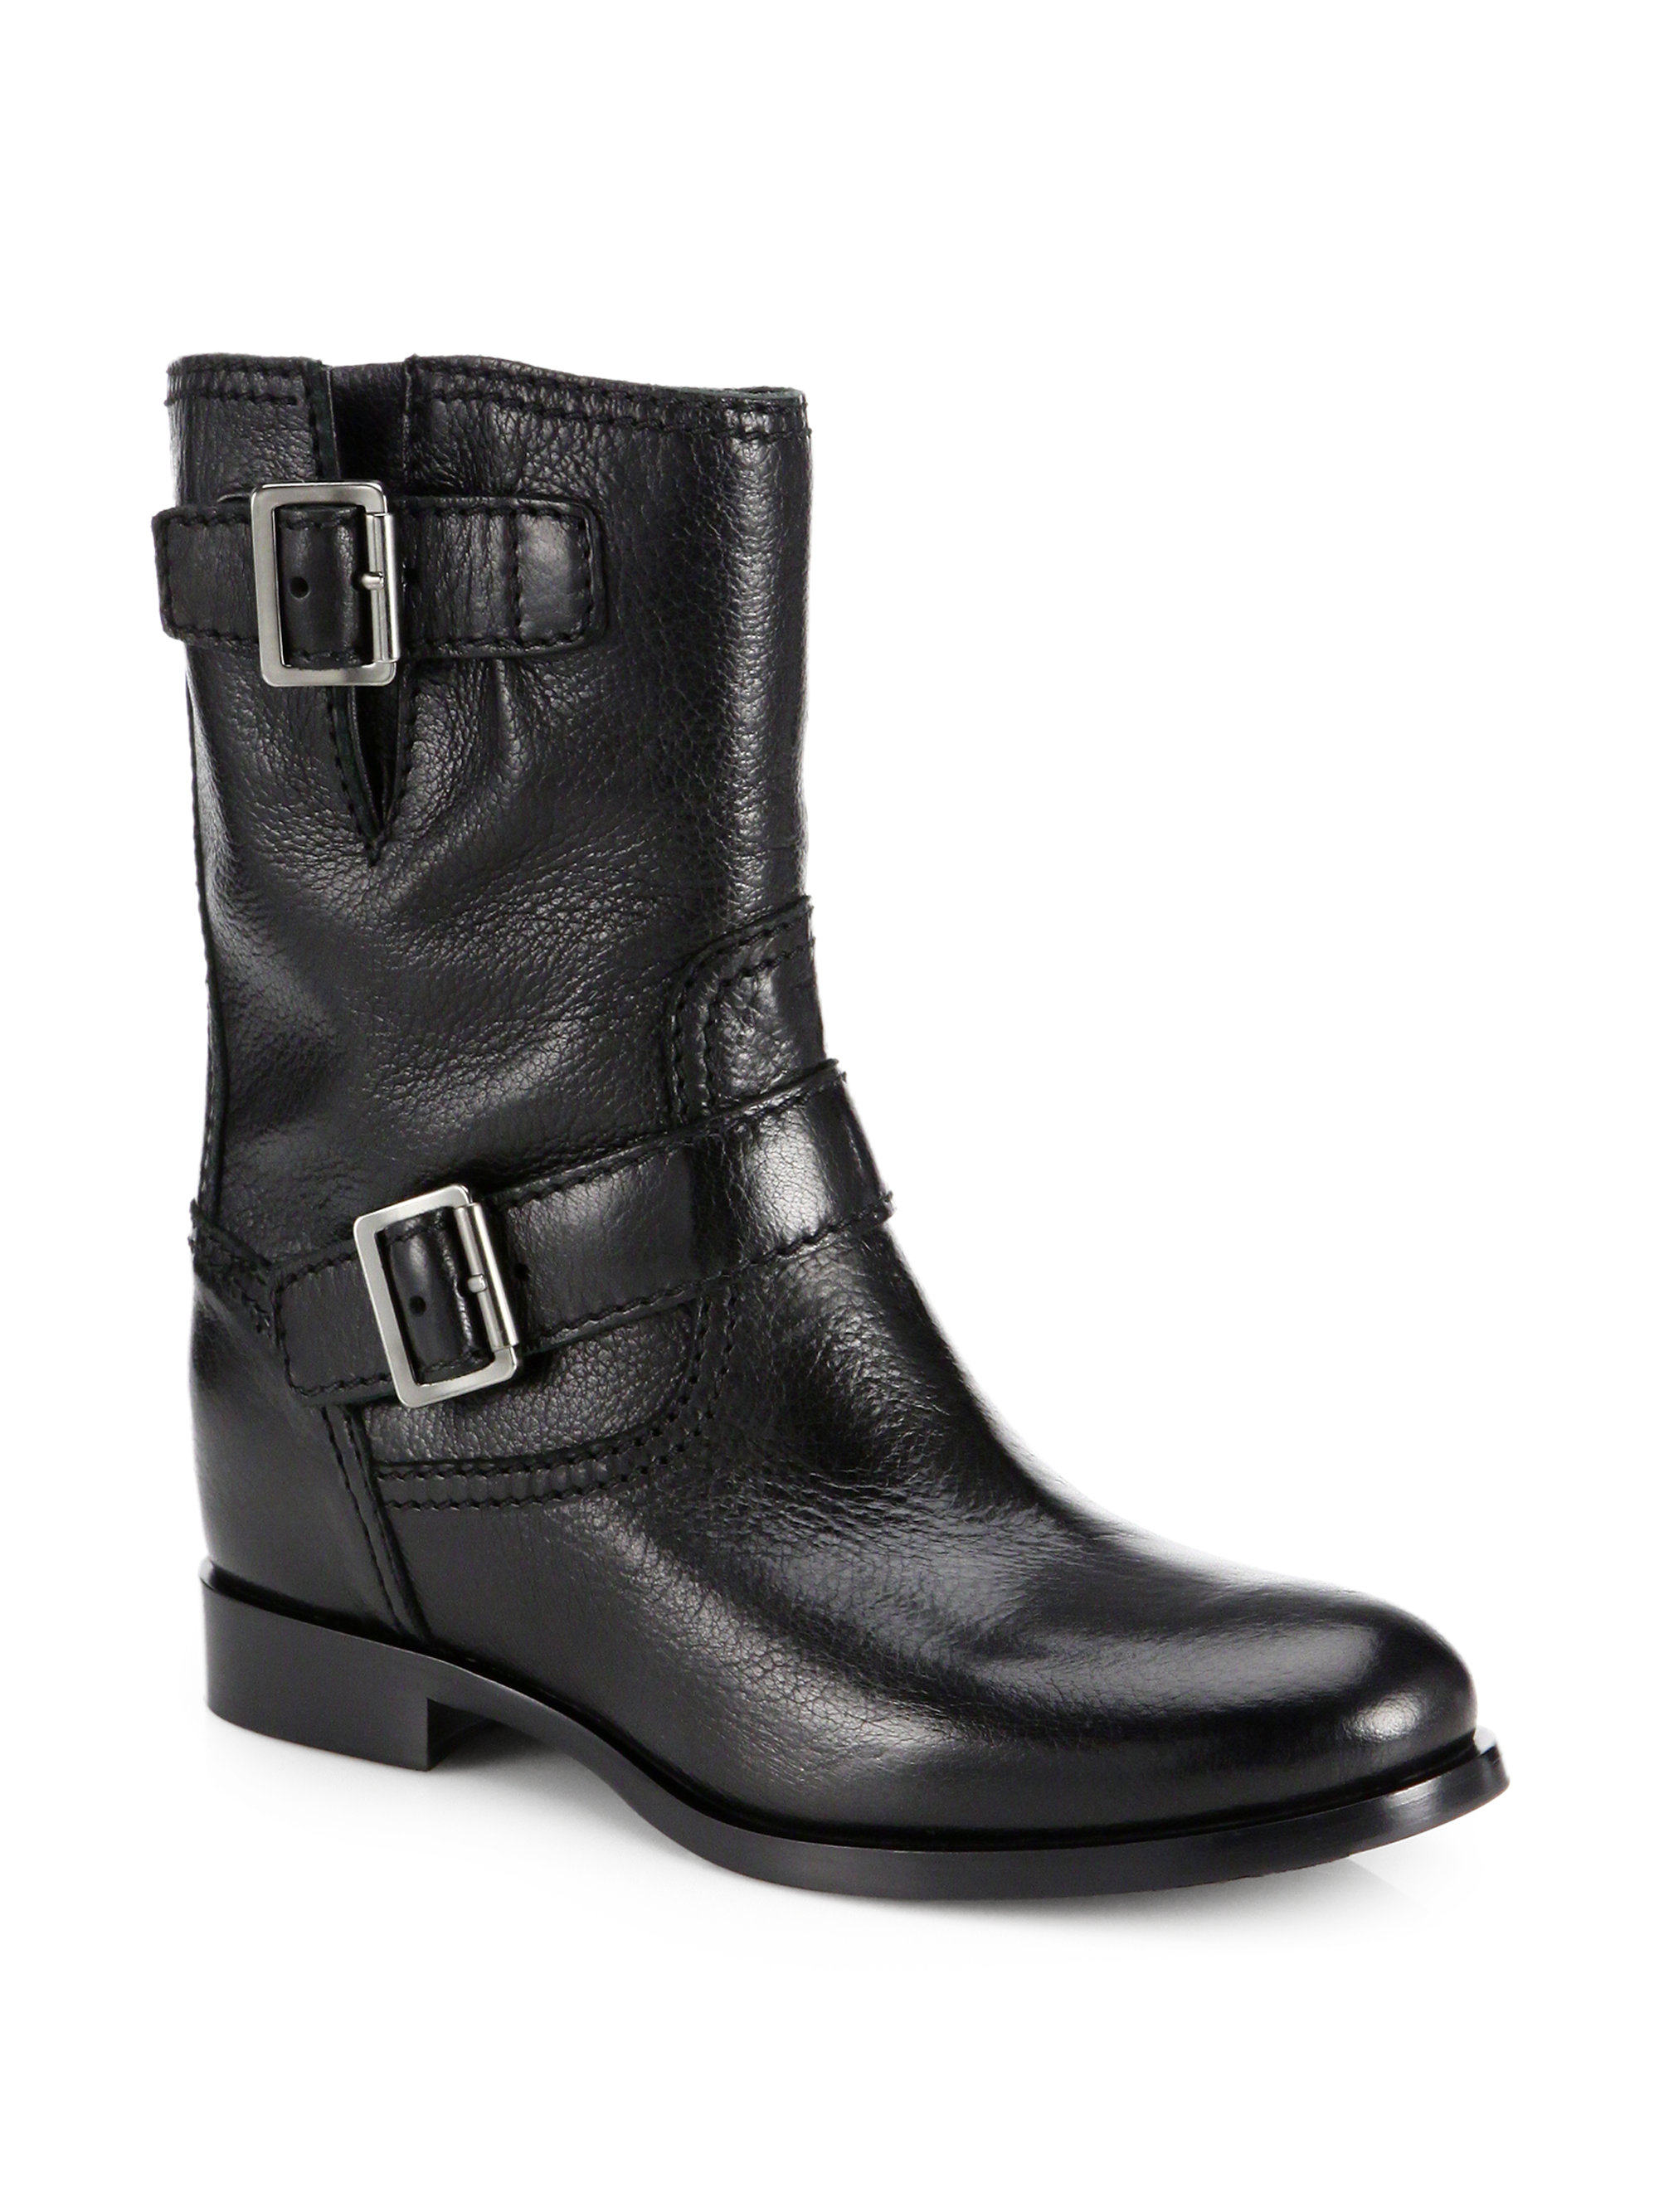 Lyst - Prada Short Leather Buckle Boots in Black